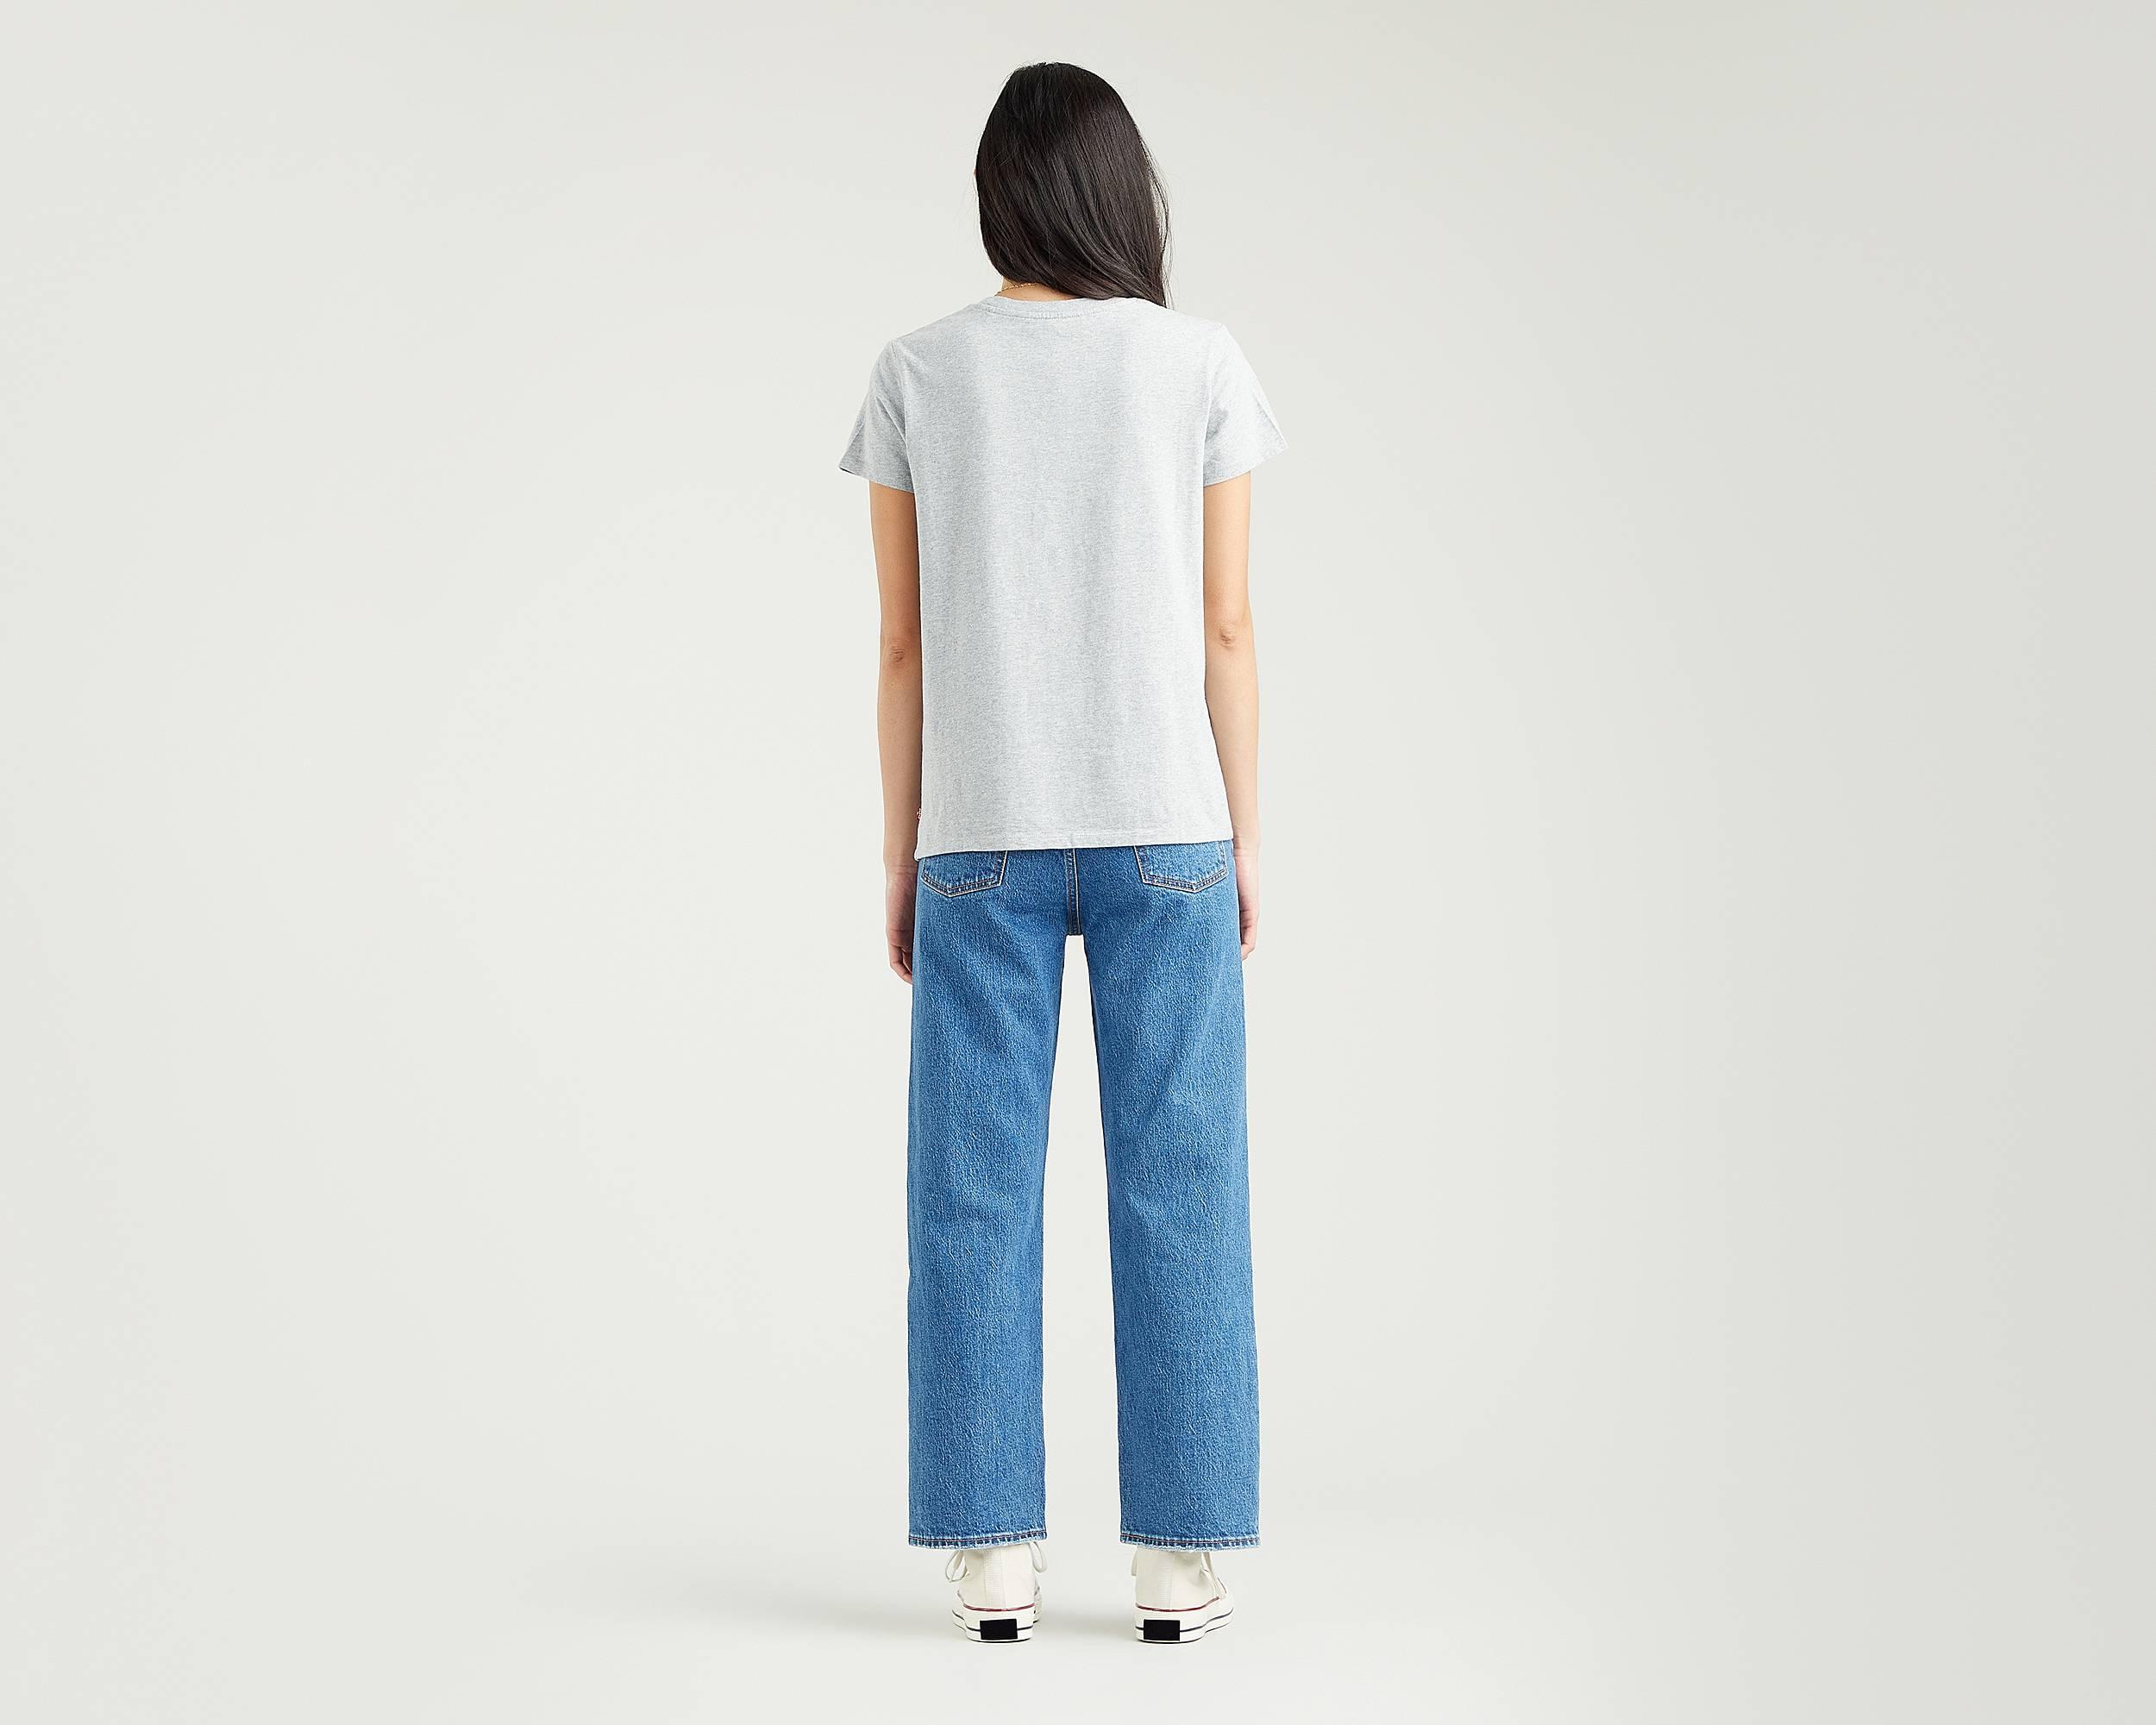 The Perfect Tee - Levi's Jeans, Jackets & Clothing